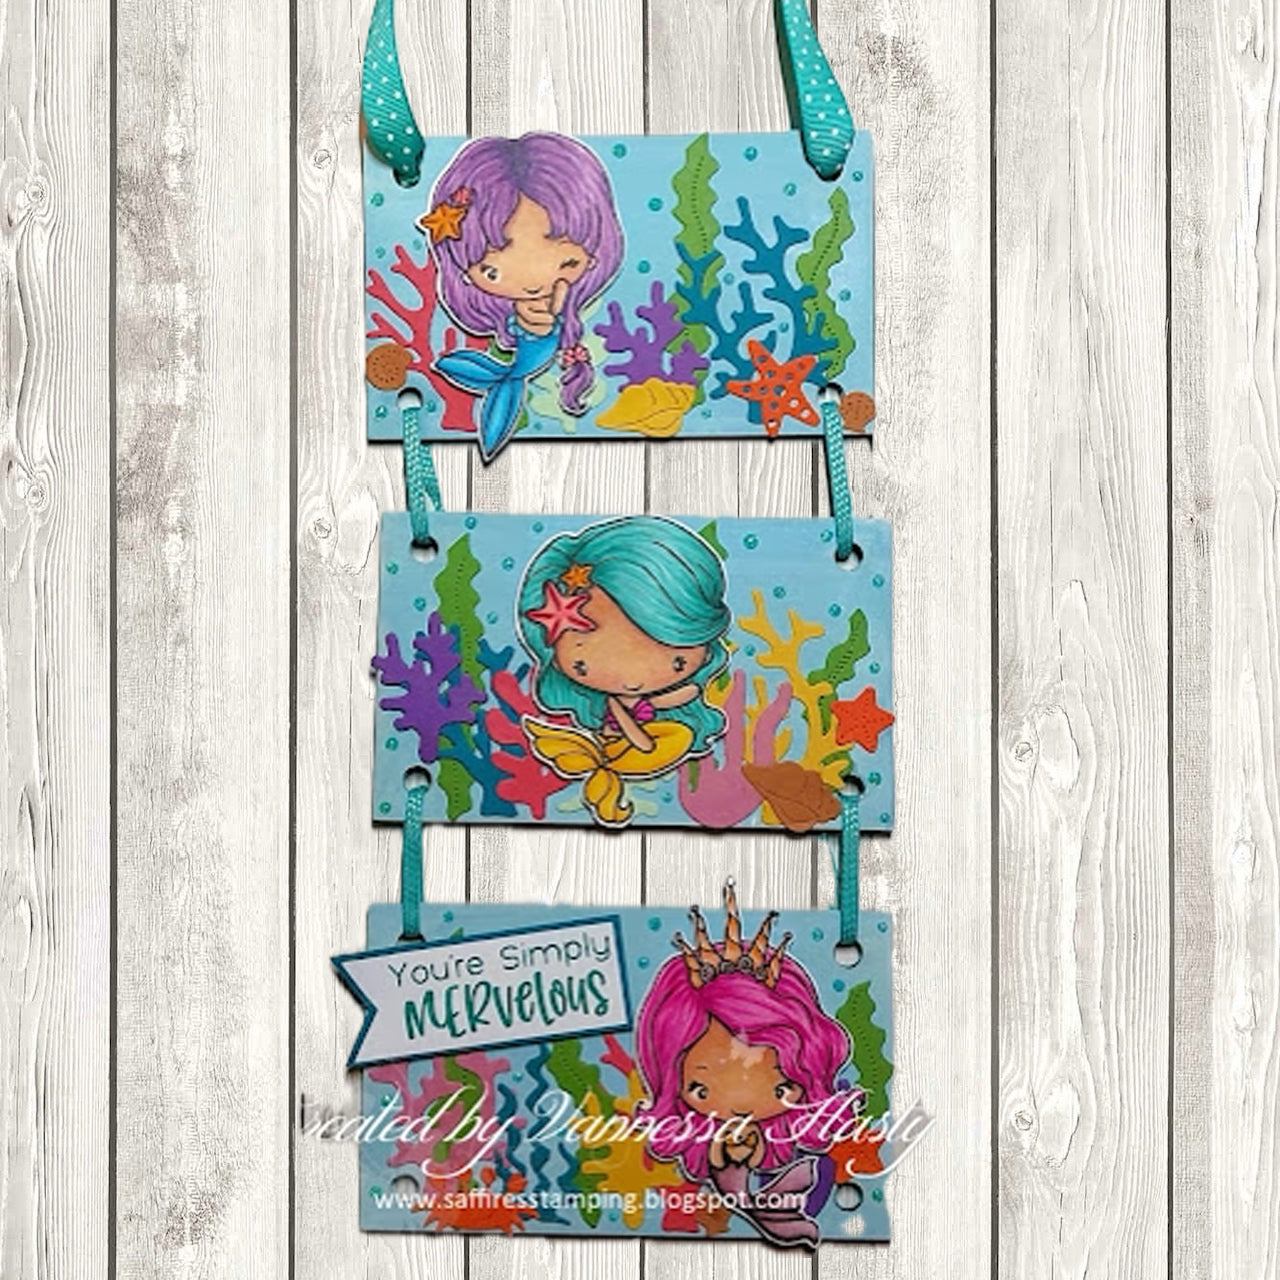 You're Simply Mervelous from Guest Designer Vannessa!